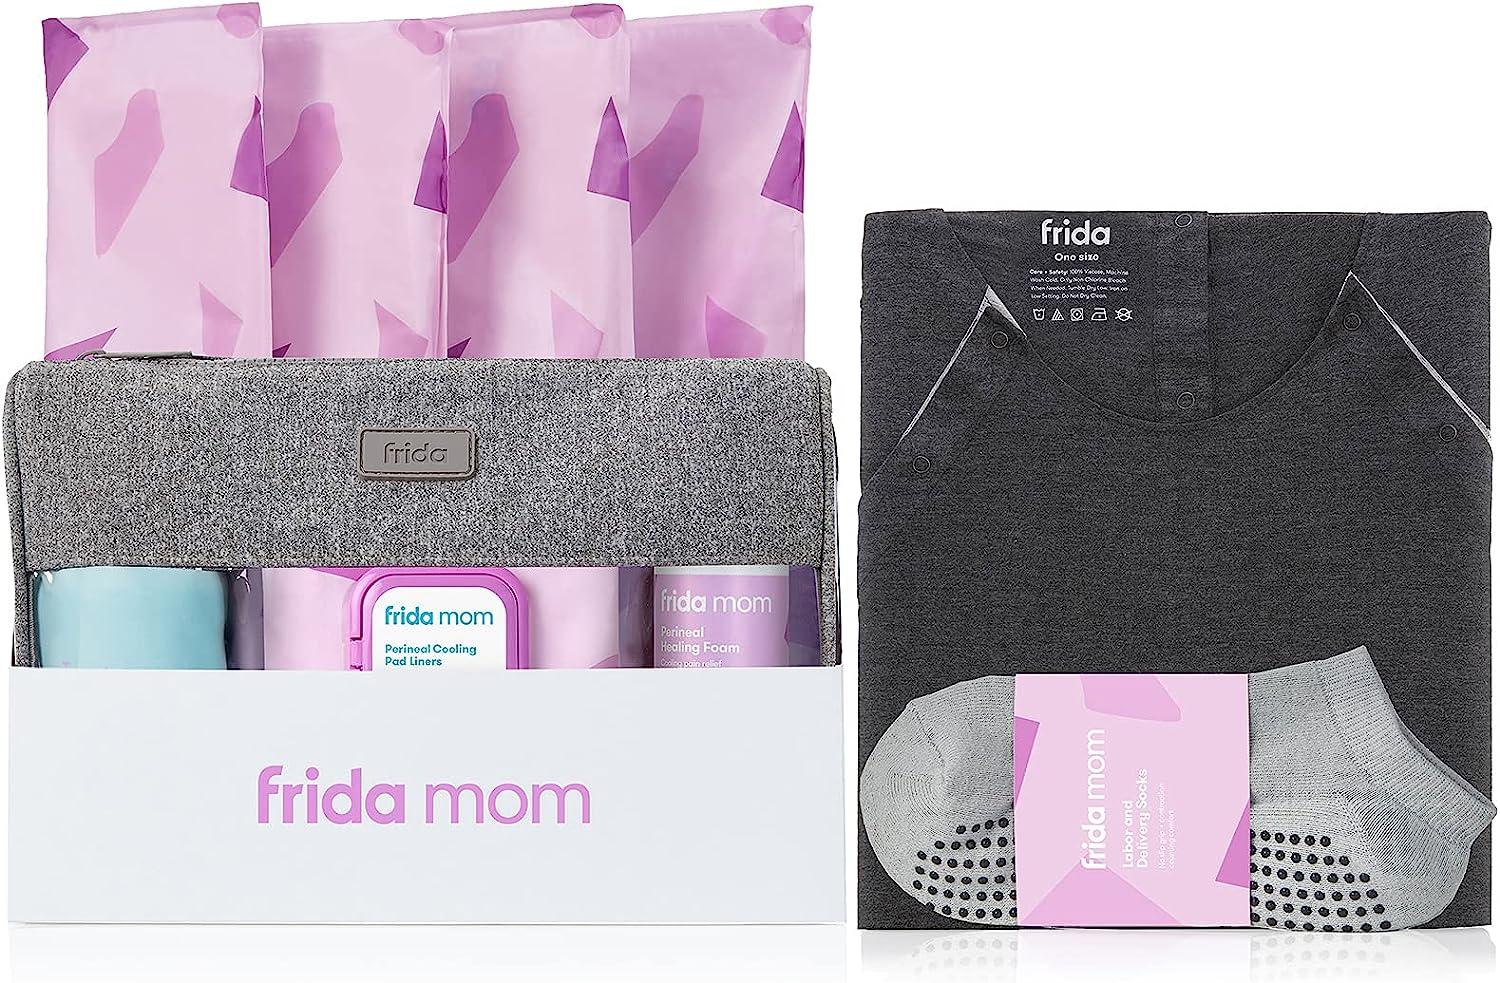 Frida Mom Hospital Packing Kit for Labor, Delivery, & Postpartum  Nursing  Gown, Socks, Peri Bottle, Disposable Underwear, Ice Maxi Pads, Pad Liners,  Perineal Foam, Toiletry Bag (15 PIECE GIFT SET)